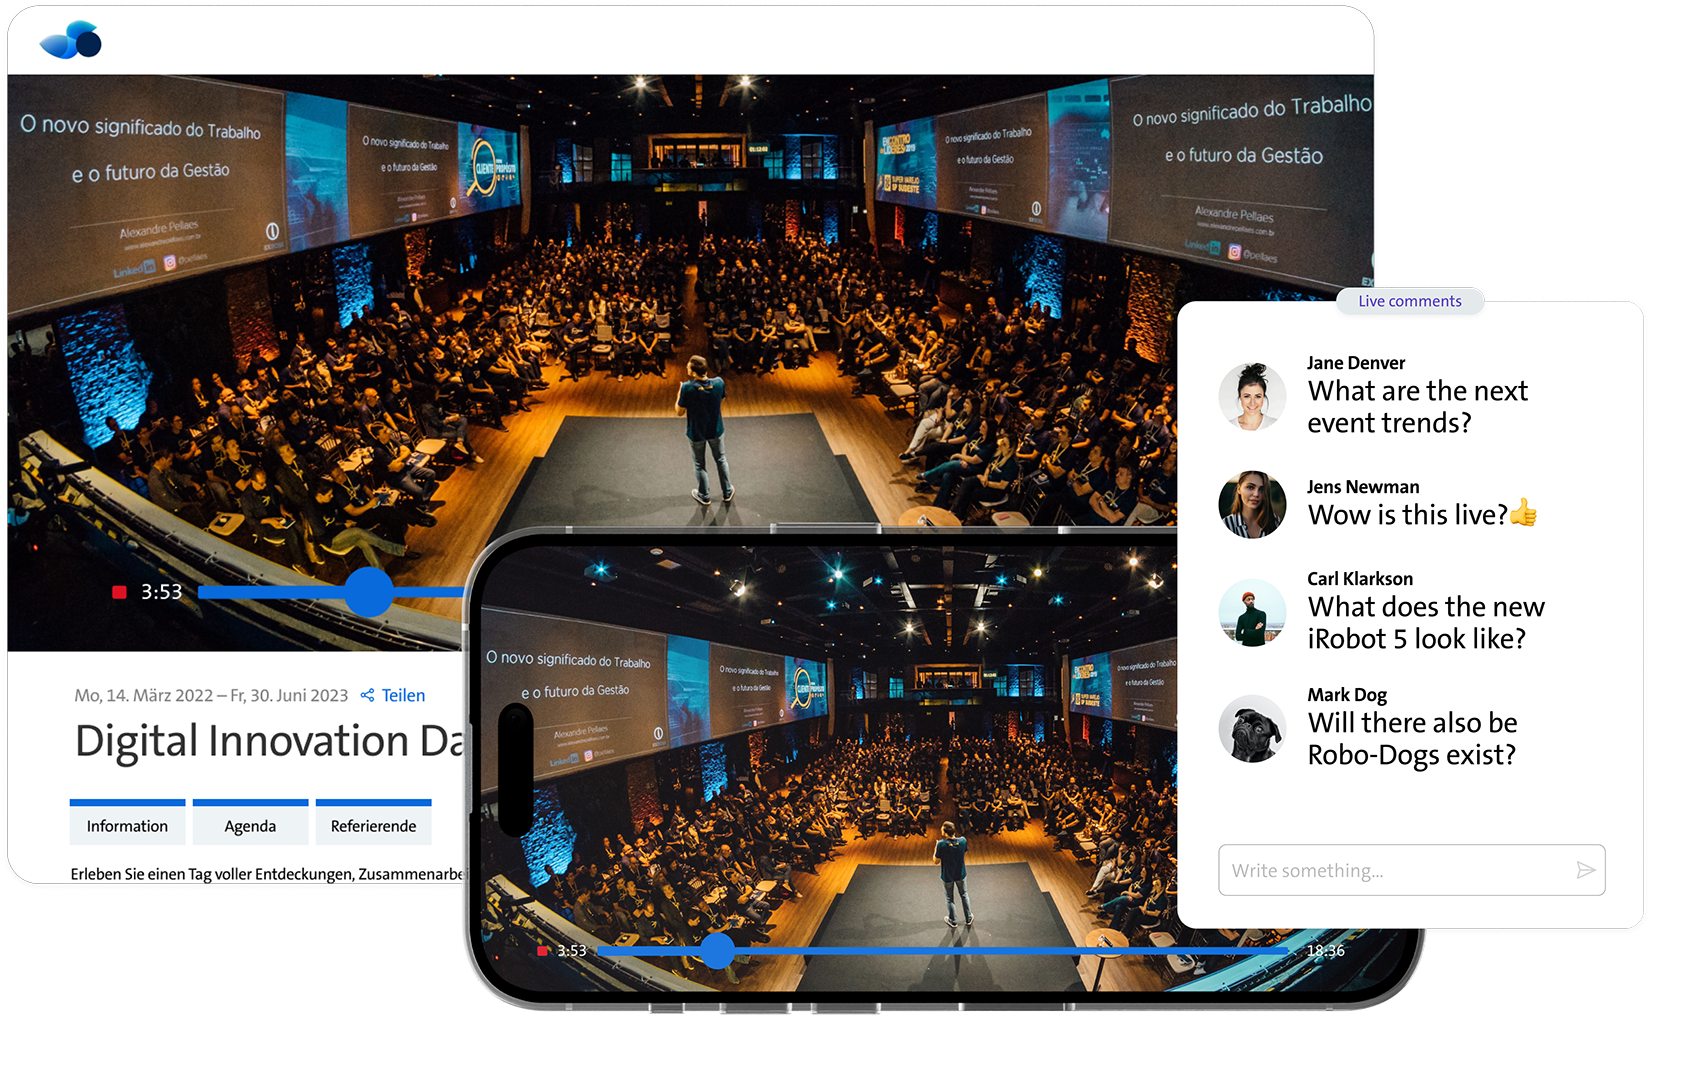 Live streaming integration for events